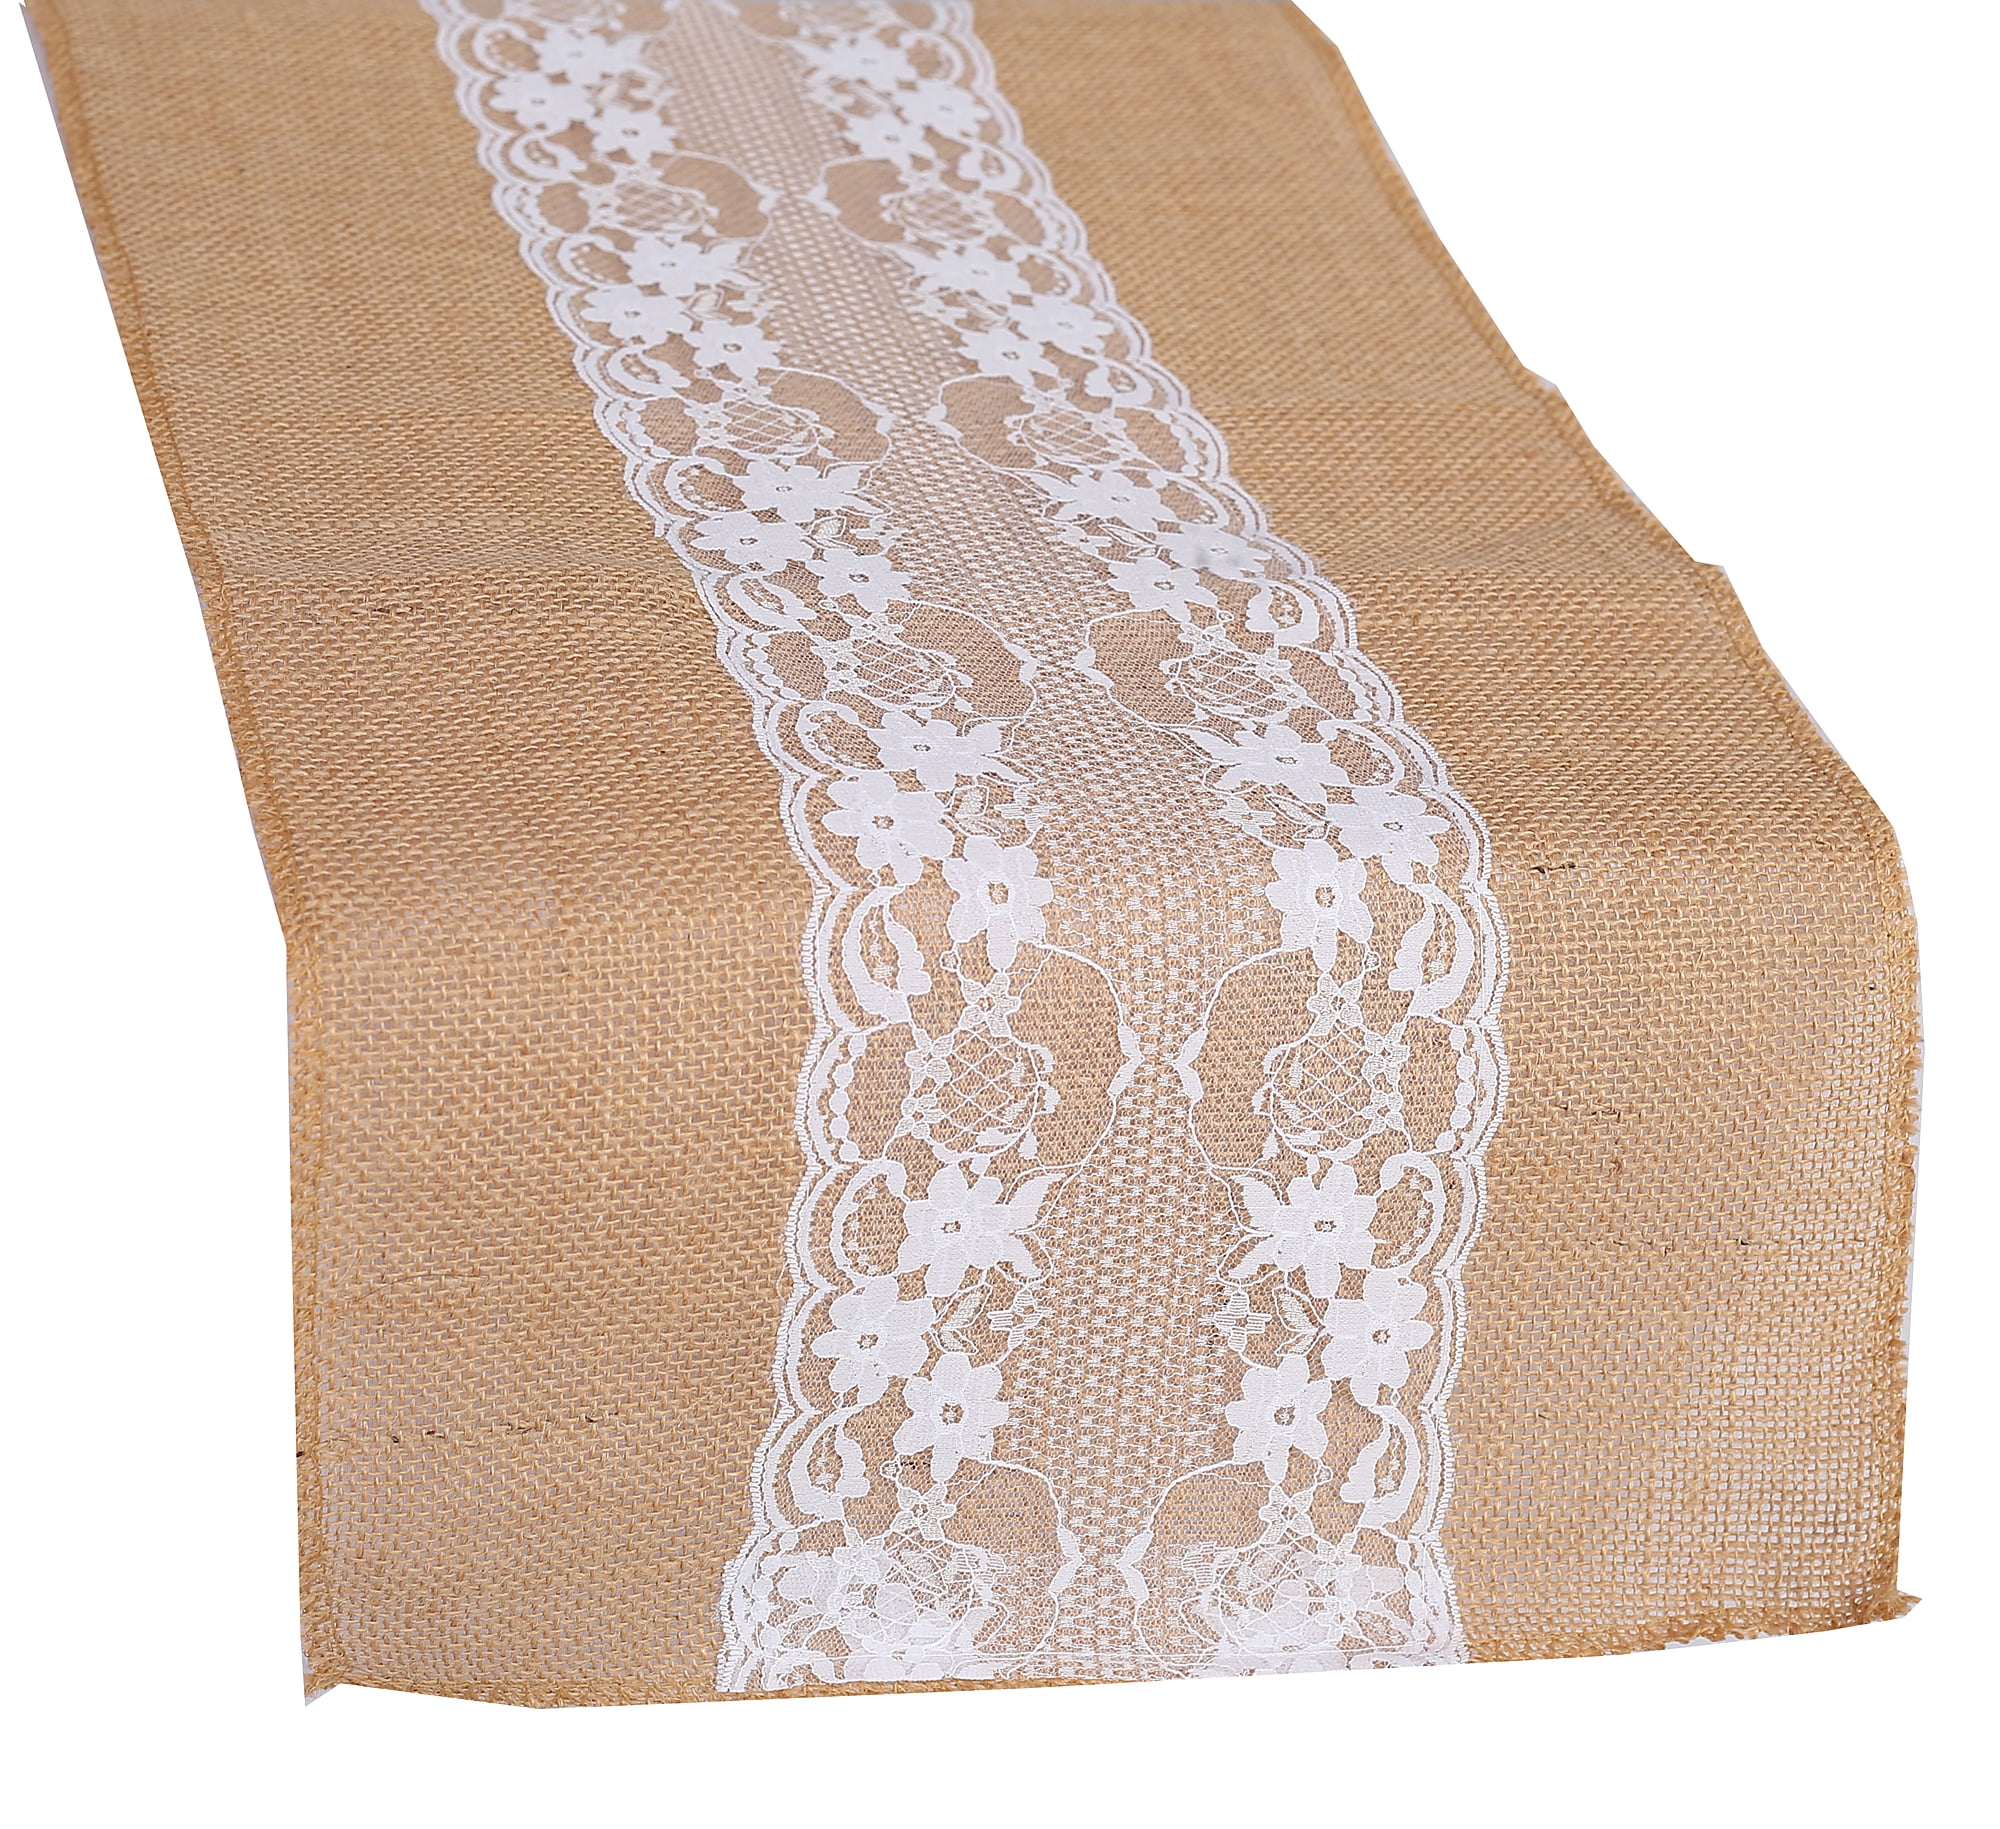 Rustic Hessian Jute Lace Table Runner Wedding Party Dinner Decor Natural Burlap 